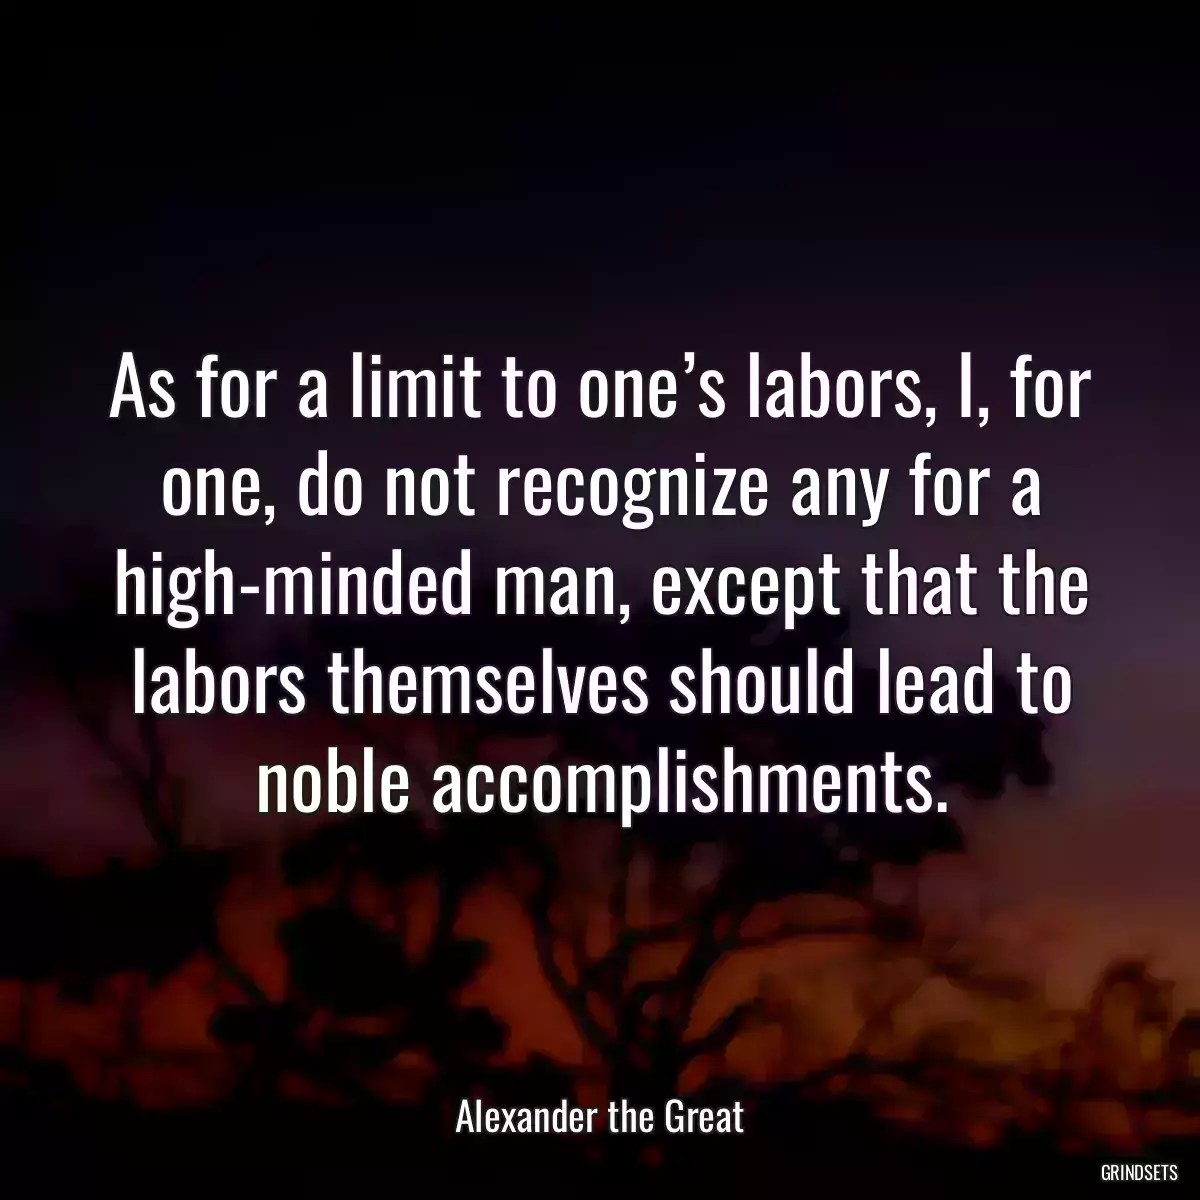 As for a limit to one’s labors, I, for one, do not recognize any for a high-minded man, except that the labors themselves should lead to noble accomplishments.